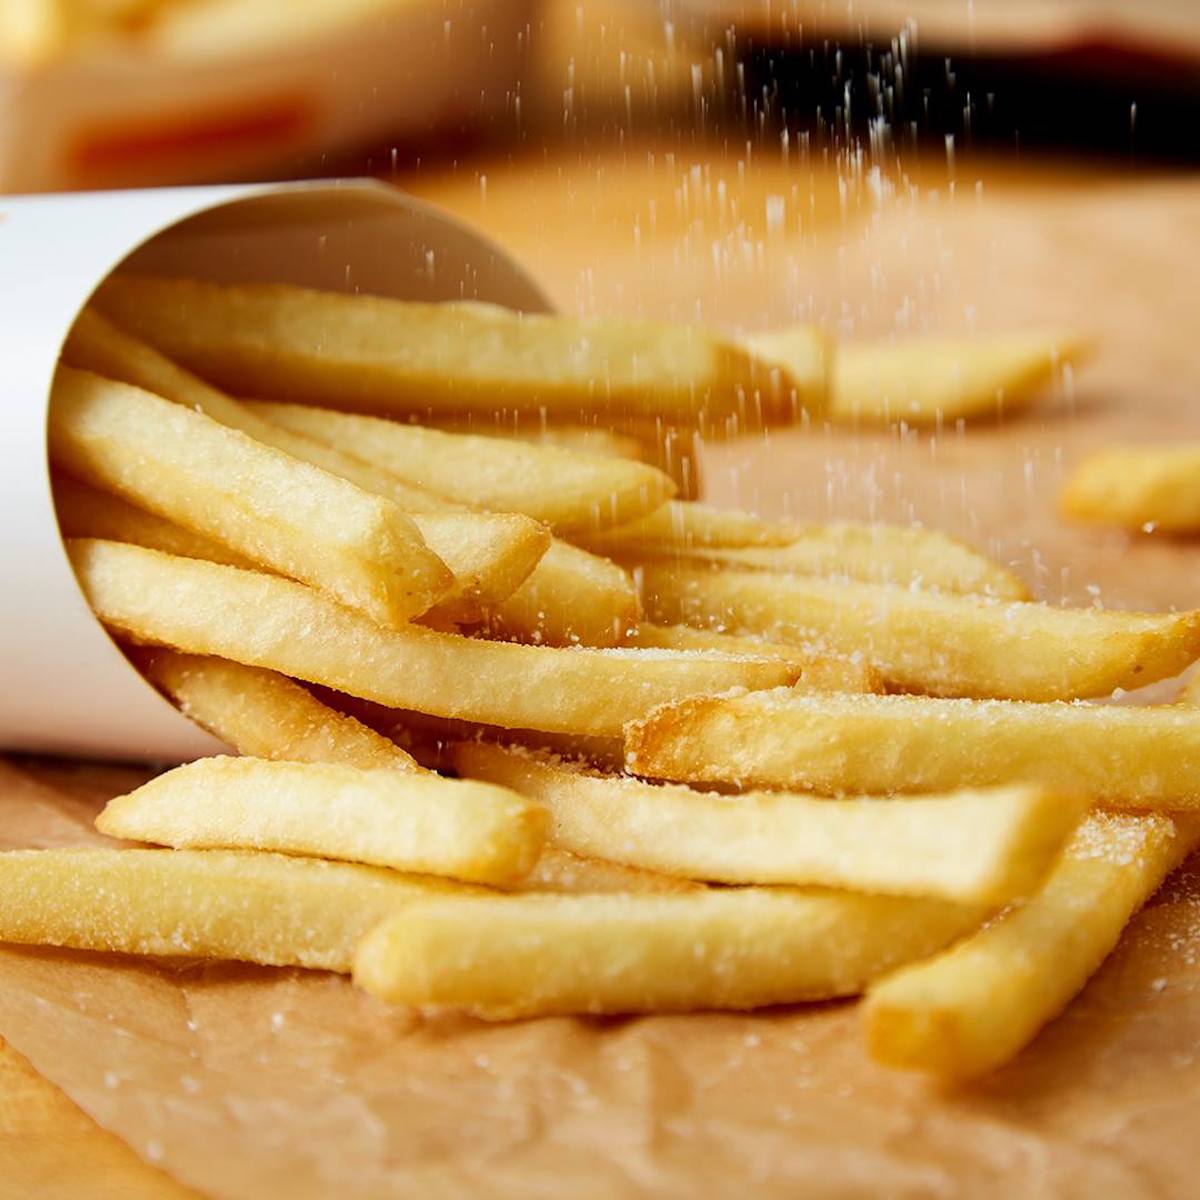 fries spilled out onto wooden counter with sea salt being sprinkled on them